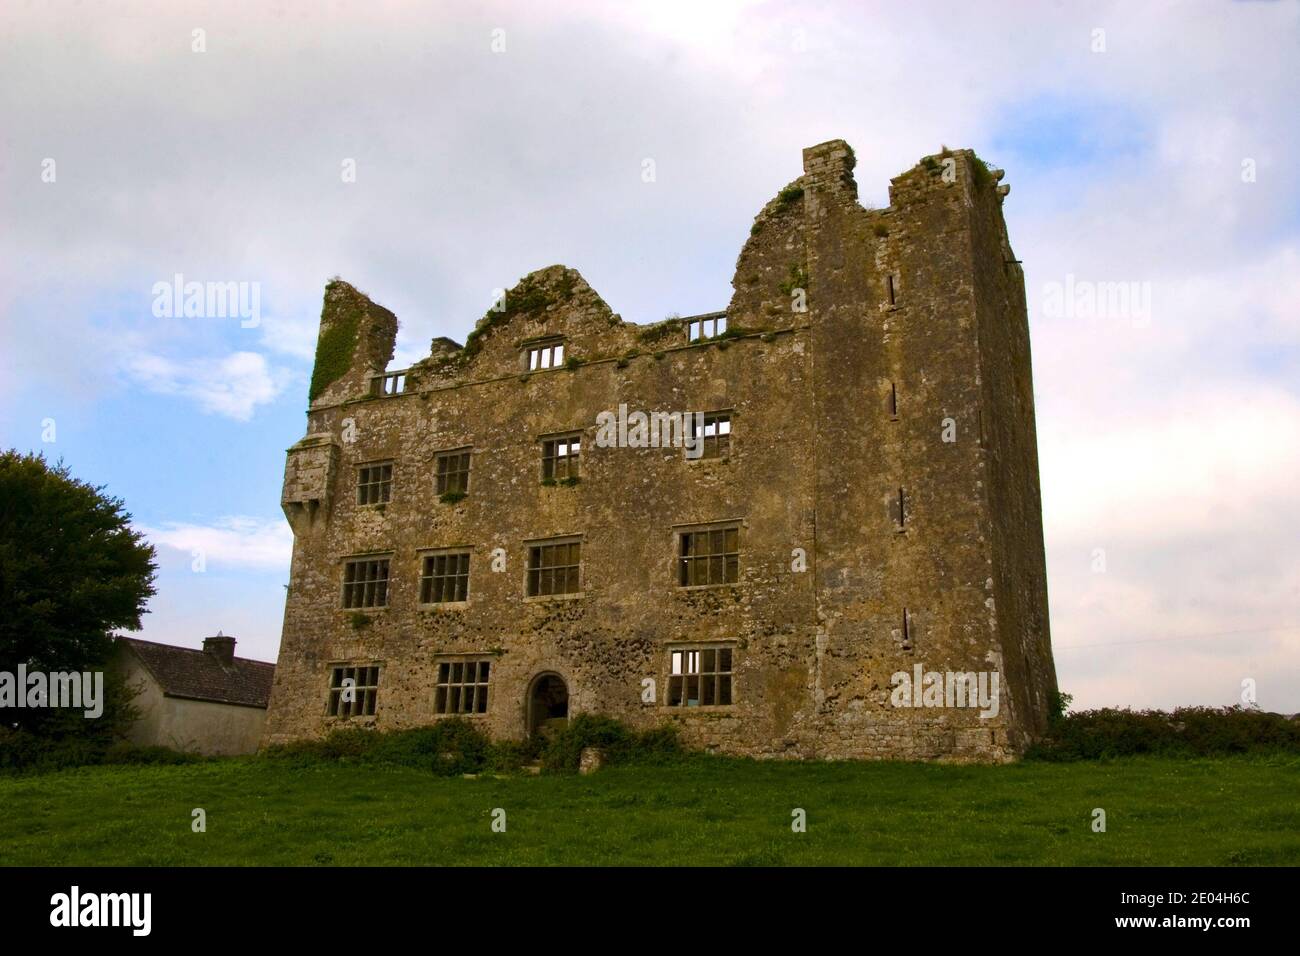 Sitting prominently at the junction of the Ballyvaughan, Kilfenora and Corofin roads, Leamaneh castle is an impressive gothic pile stuck onto a tower Stock Photo